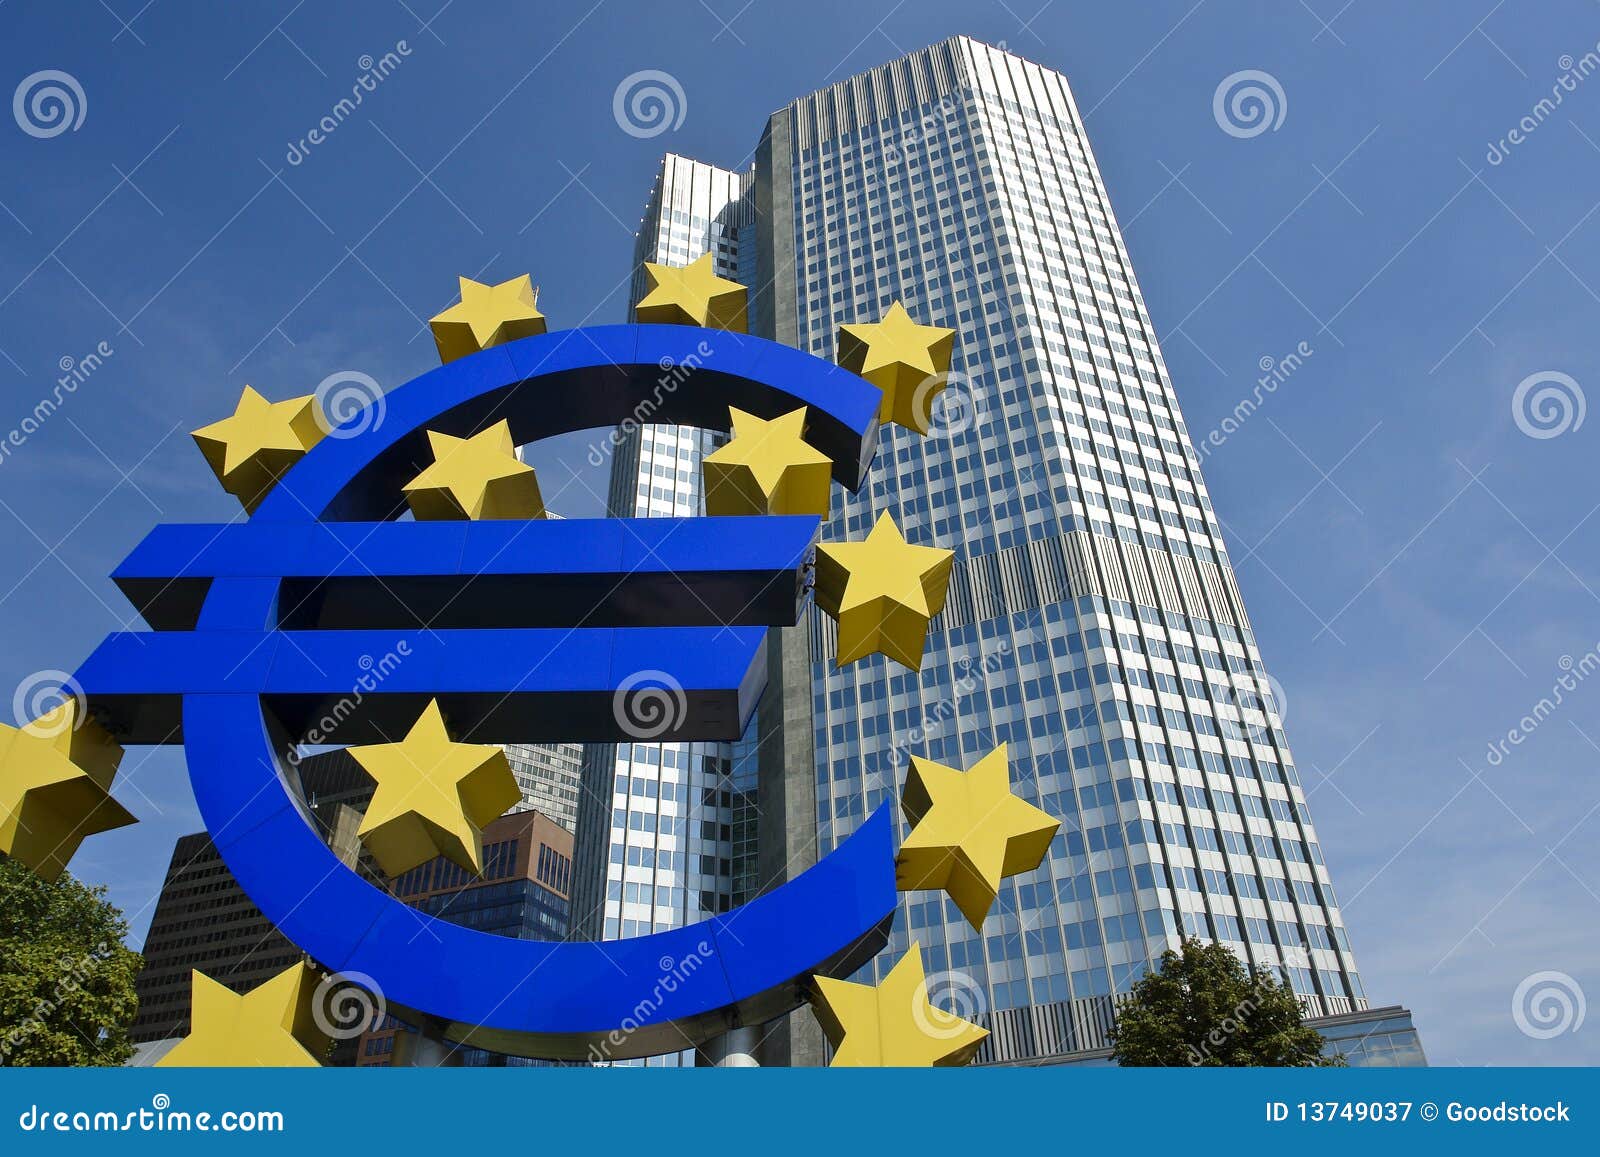 european central bank with euro sign, frankfurt